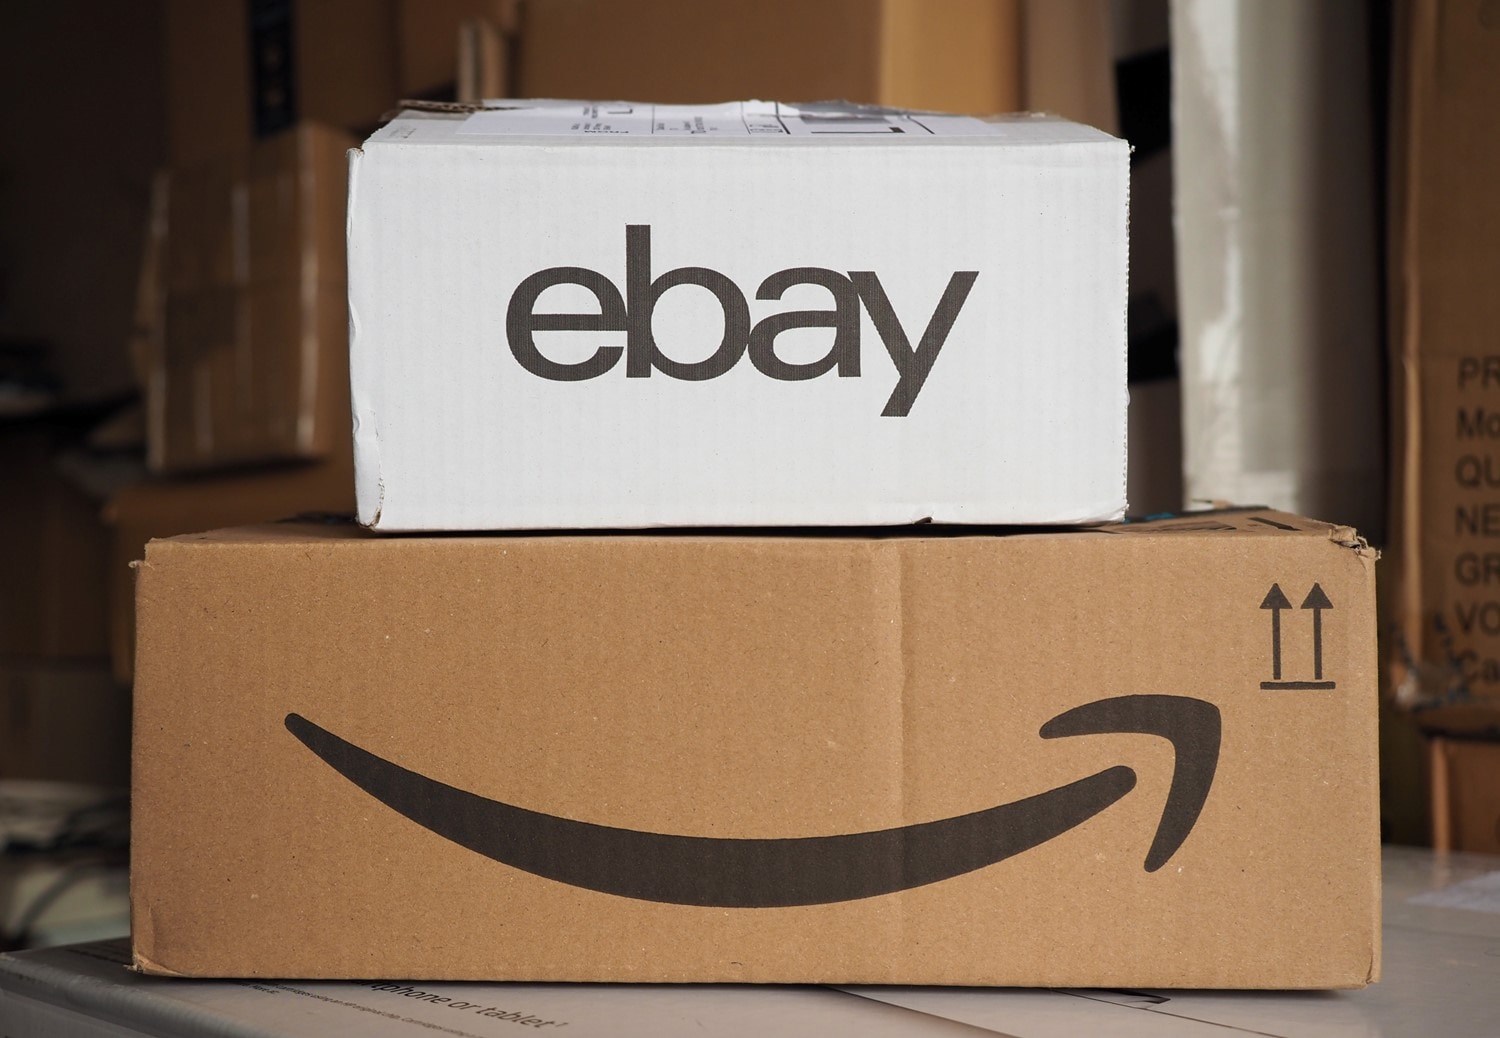 A smaller boxed package with the eBay logo sitting on top of a larger boxed package with the Amazon arrow graphic.